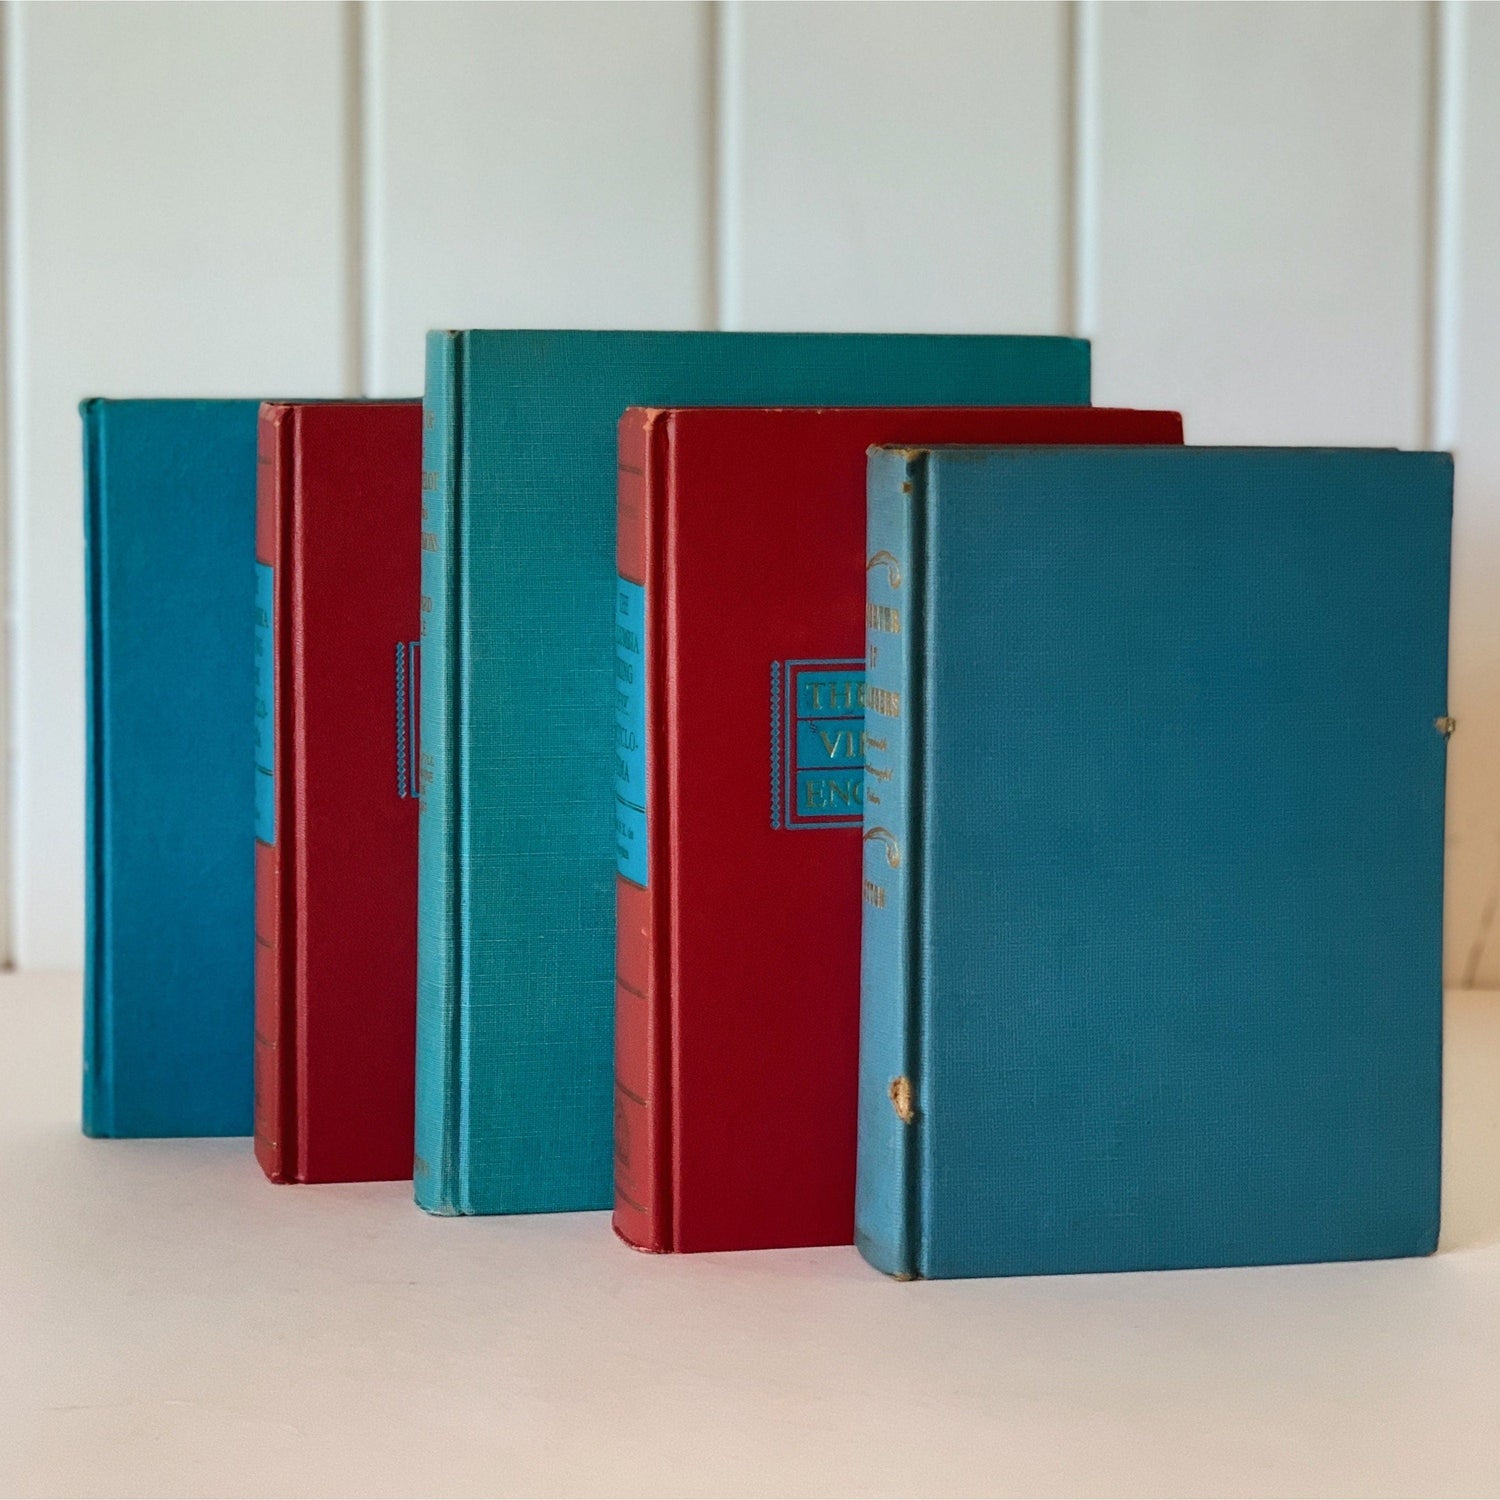 Red and Turquoise Decorative Books, Mid-Century Decor